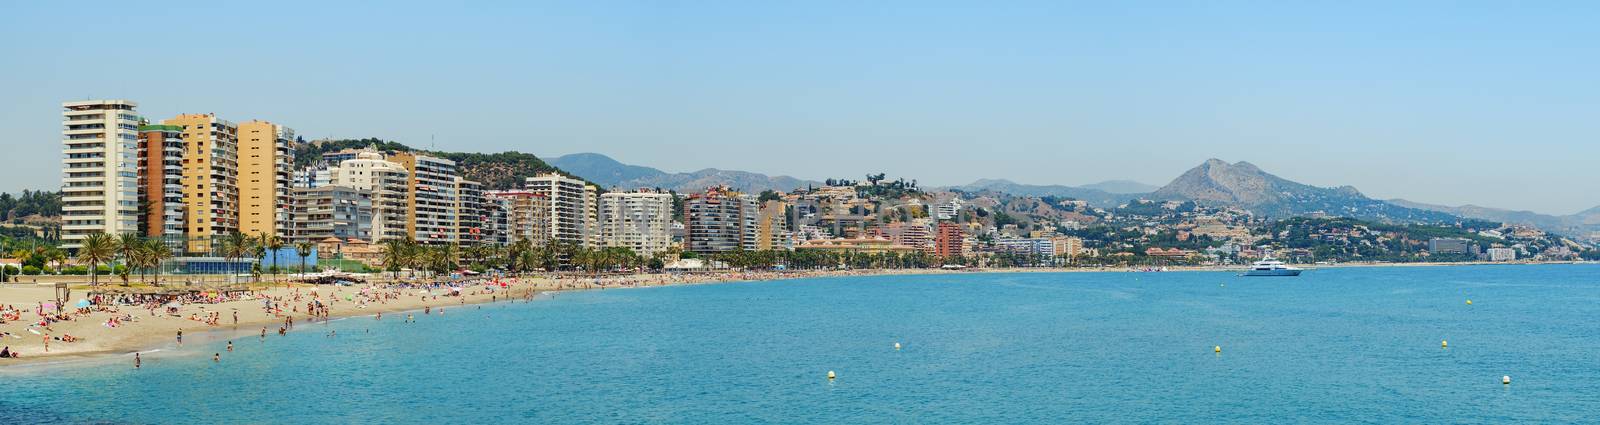 Panoramic view over the Malagueta beach on a clear day by Roberto